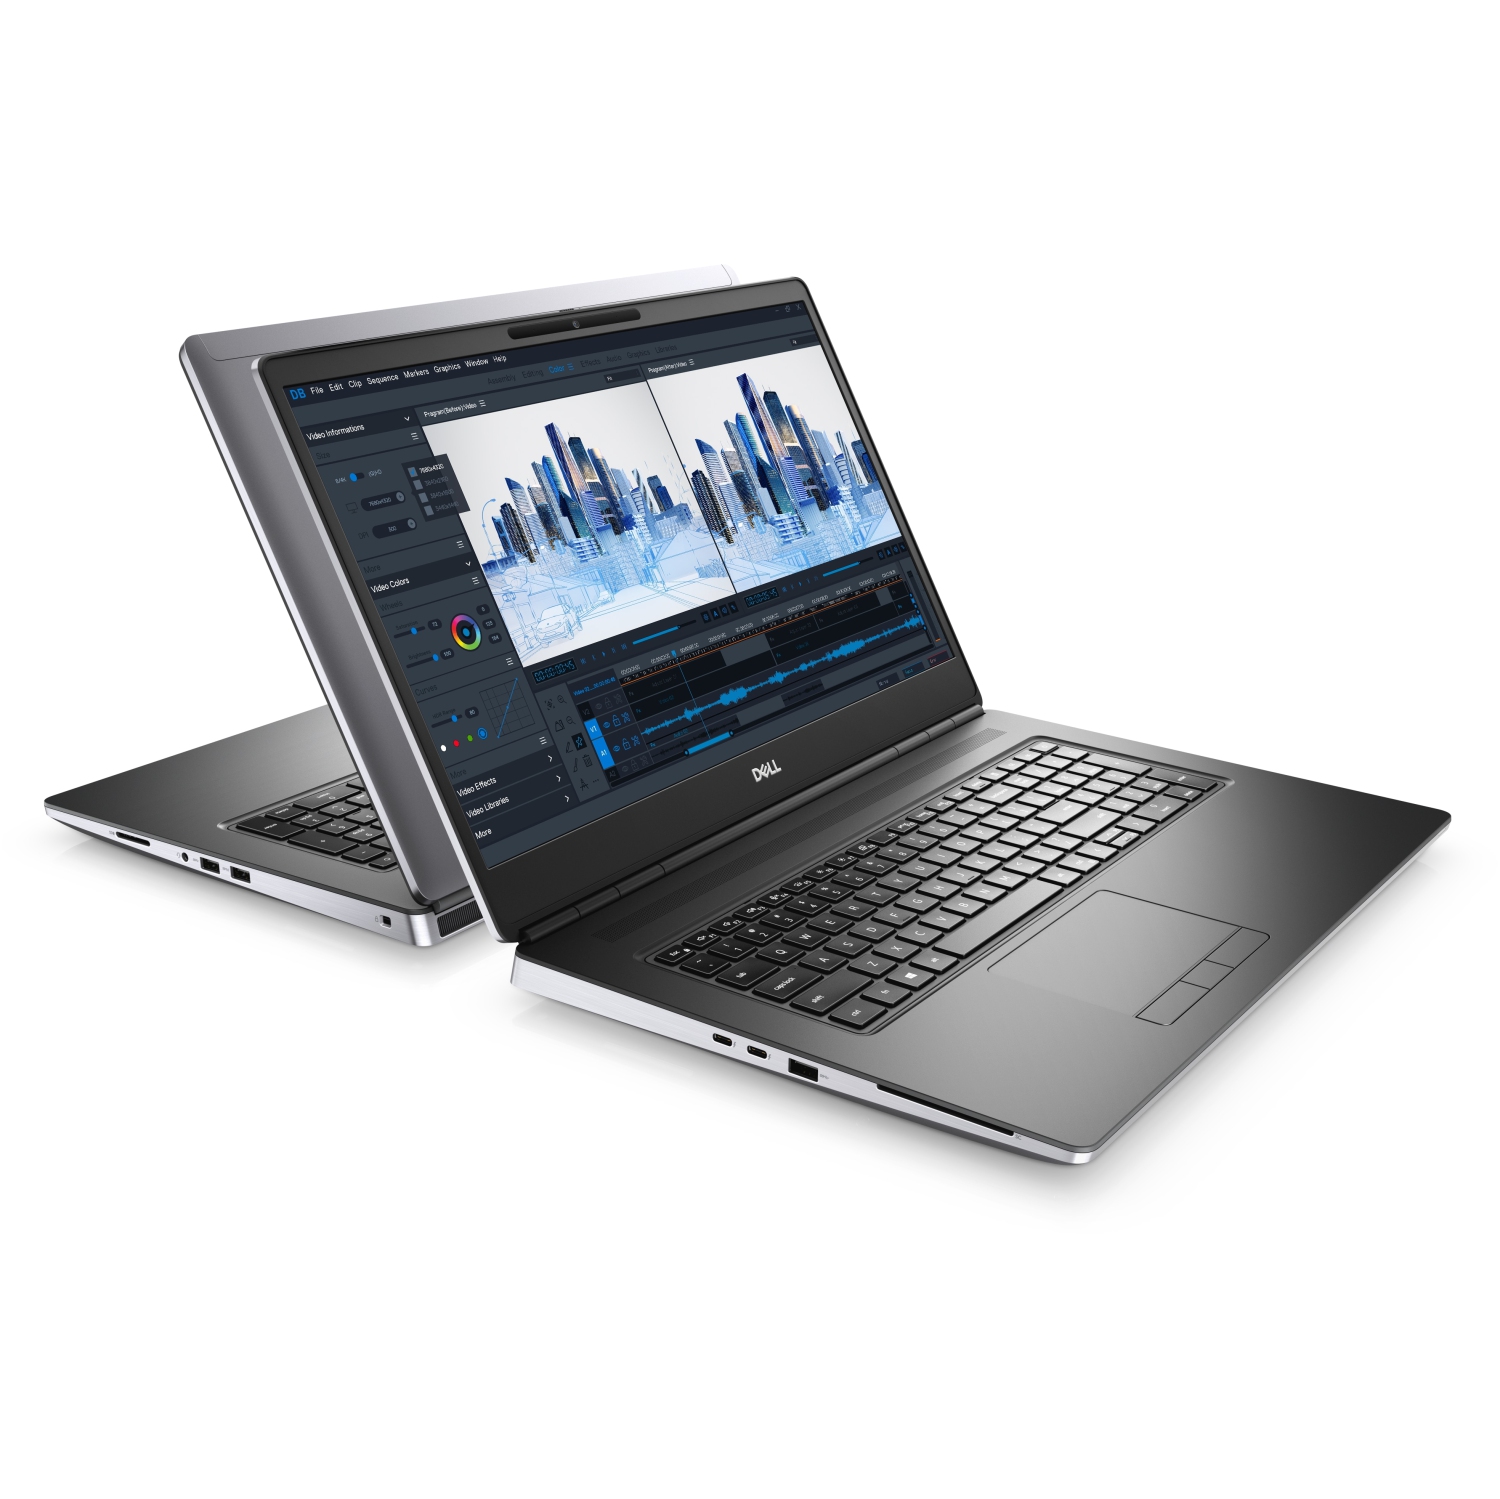 Refurbished (Excellent) - Dell Precision 7000 7760 Workstation Laptop (2021), 17.3" 4K, Core i9, 1TB SSD + 1TB SSD, 128GB RAM, RTX A5000, 5 GHz, 11th Gen CPU Certified